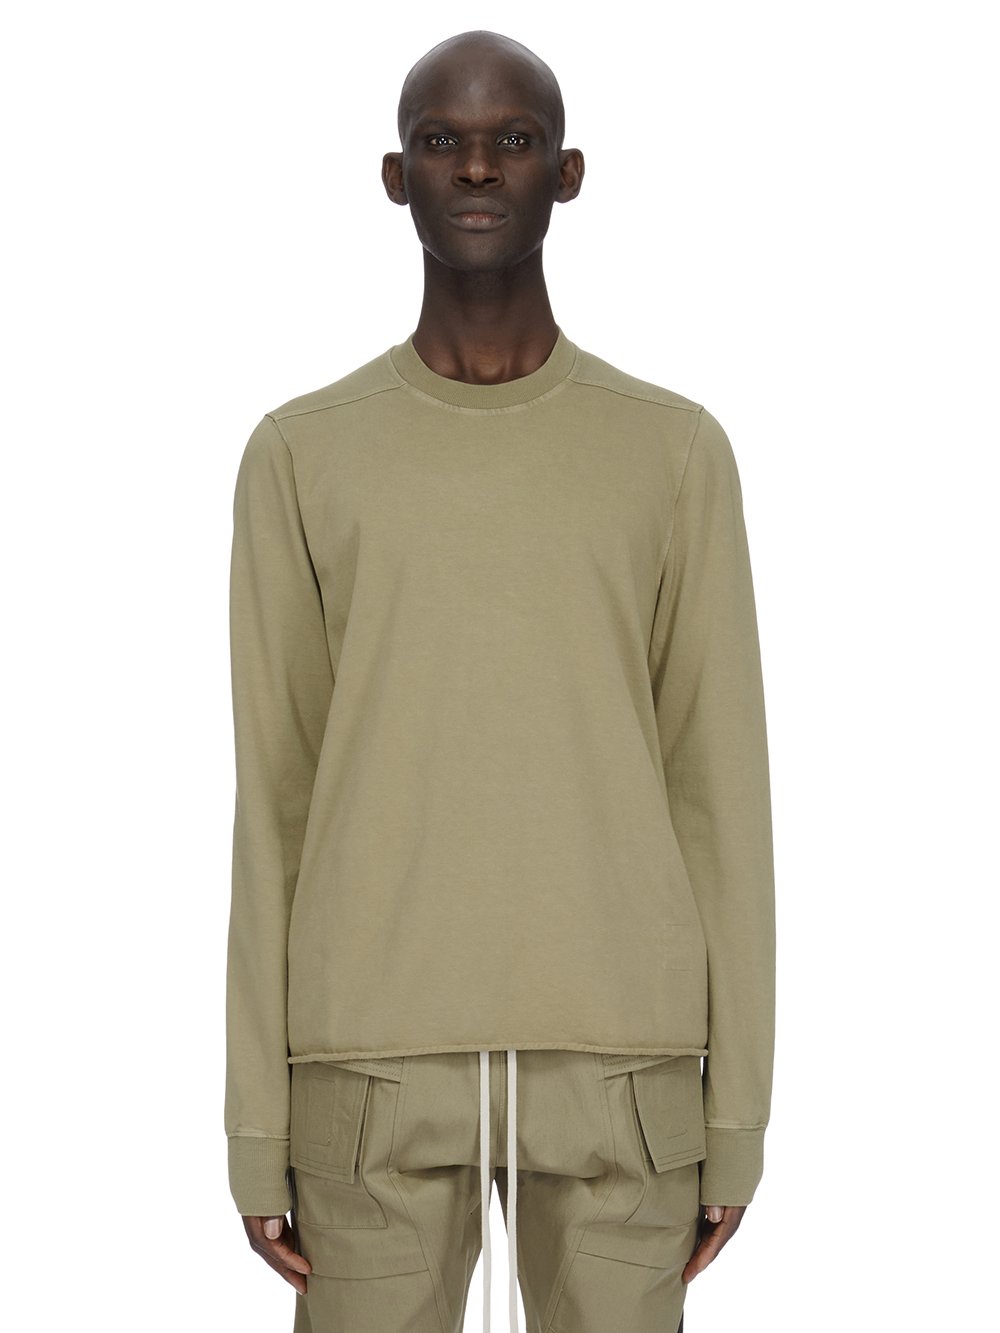 RICK OWENS FW23 LUXOR CREWNECK SWEAT IN PALE GREEN COMPACT HEAVY COTTON JERSEY